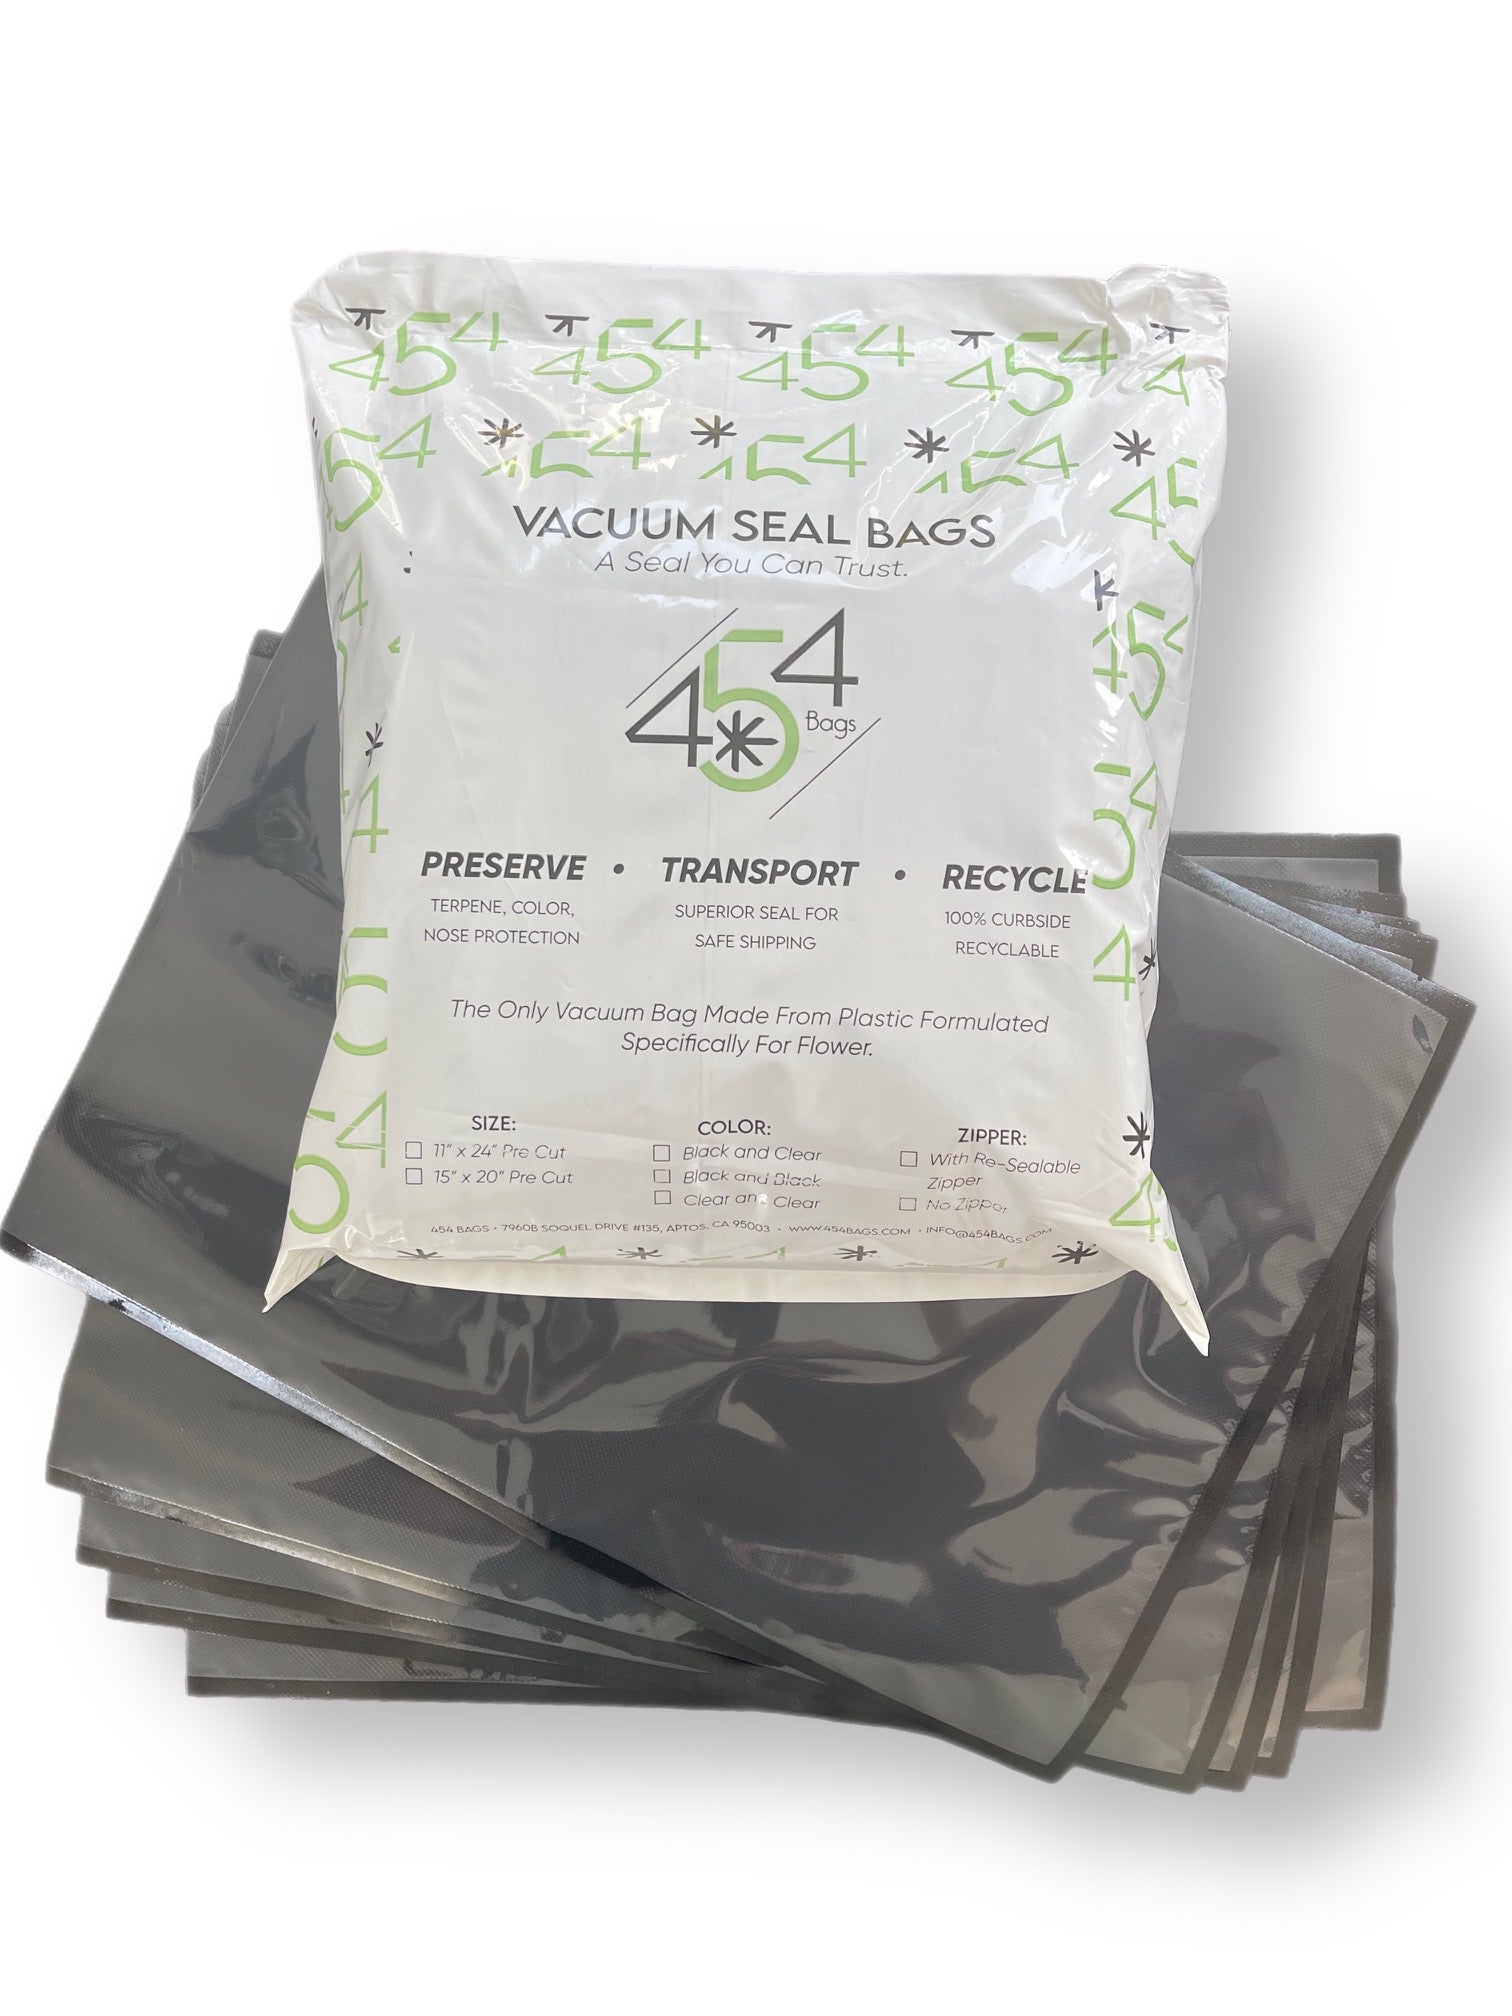 Packaging of 454 Vacuum Bags displayed next to the actual 11"x24" bags. Tailored for cannabis storage, they showcase a clear side for content inspection and a black side for discretion.